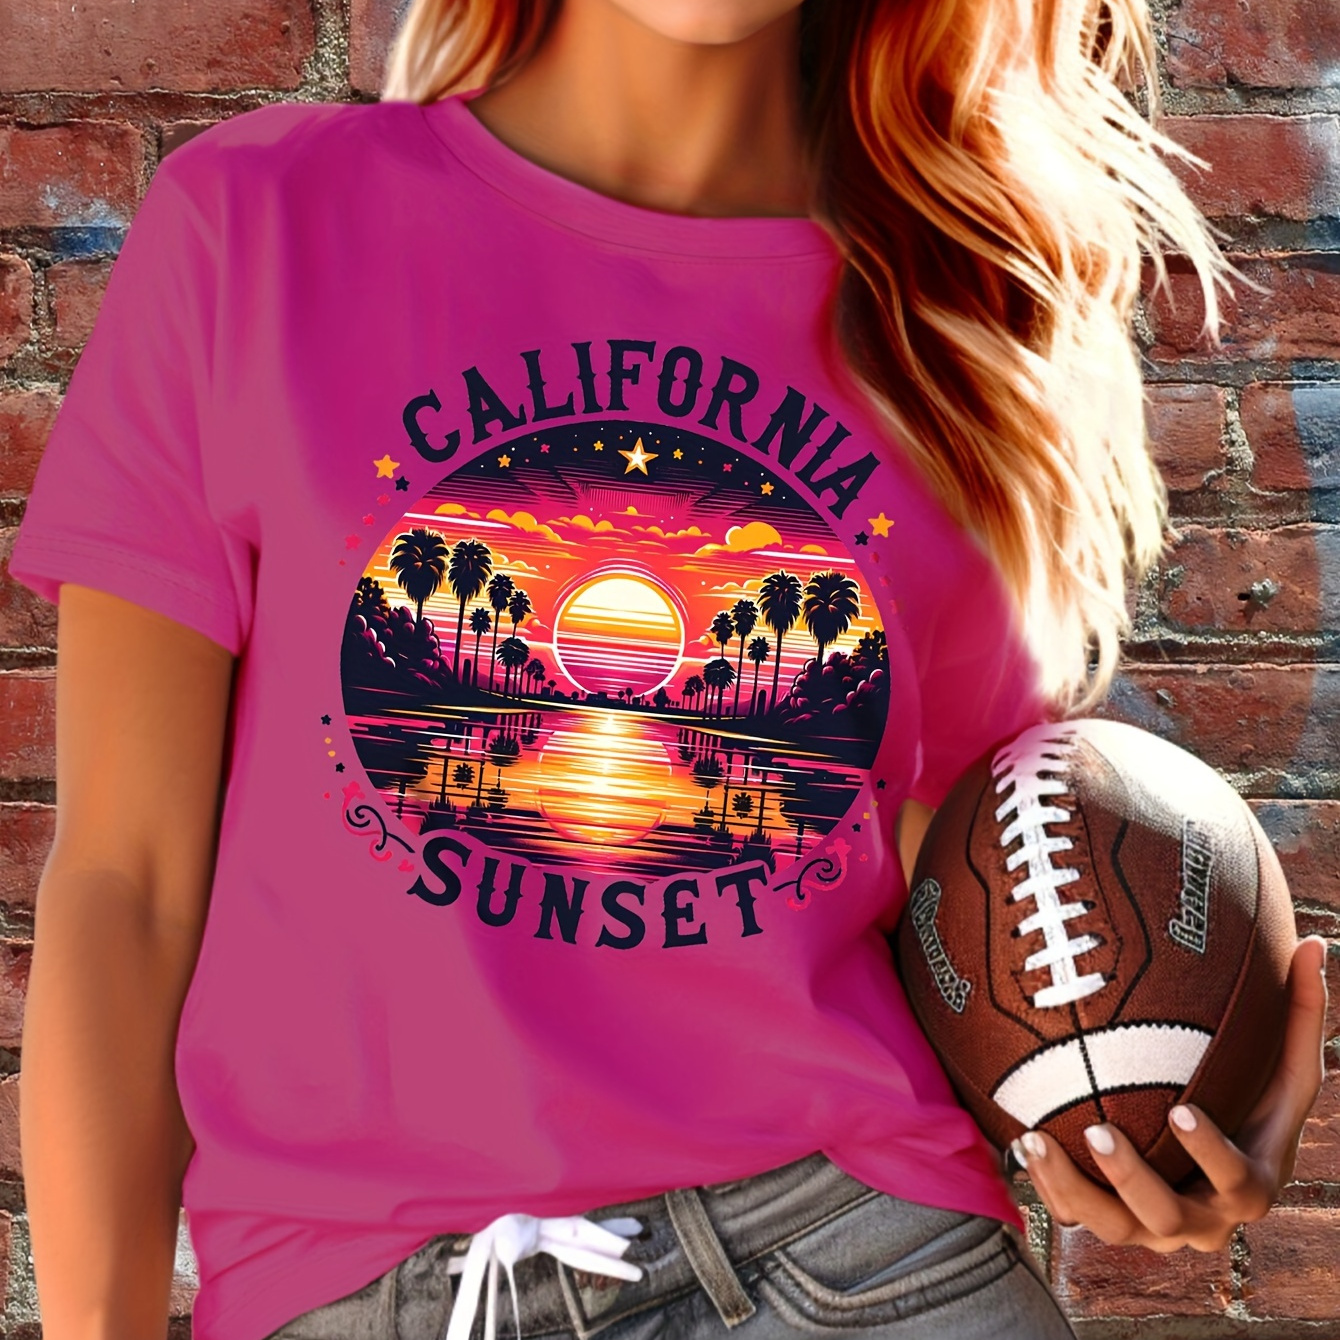 

California Sunset Print T-shirt, Casual Crew Neck Short Sleeve Top For Spring & Summer, Women's Clothing